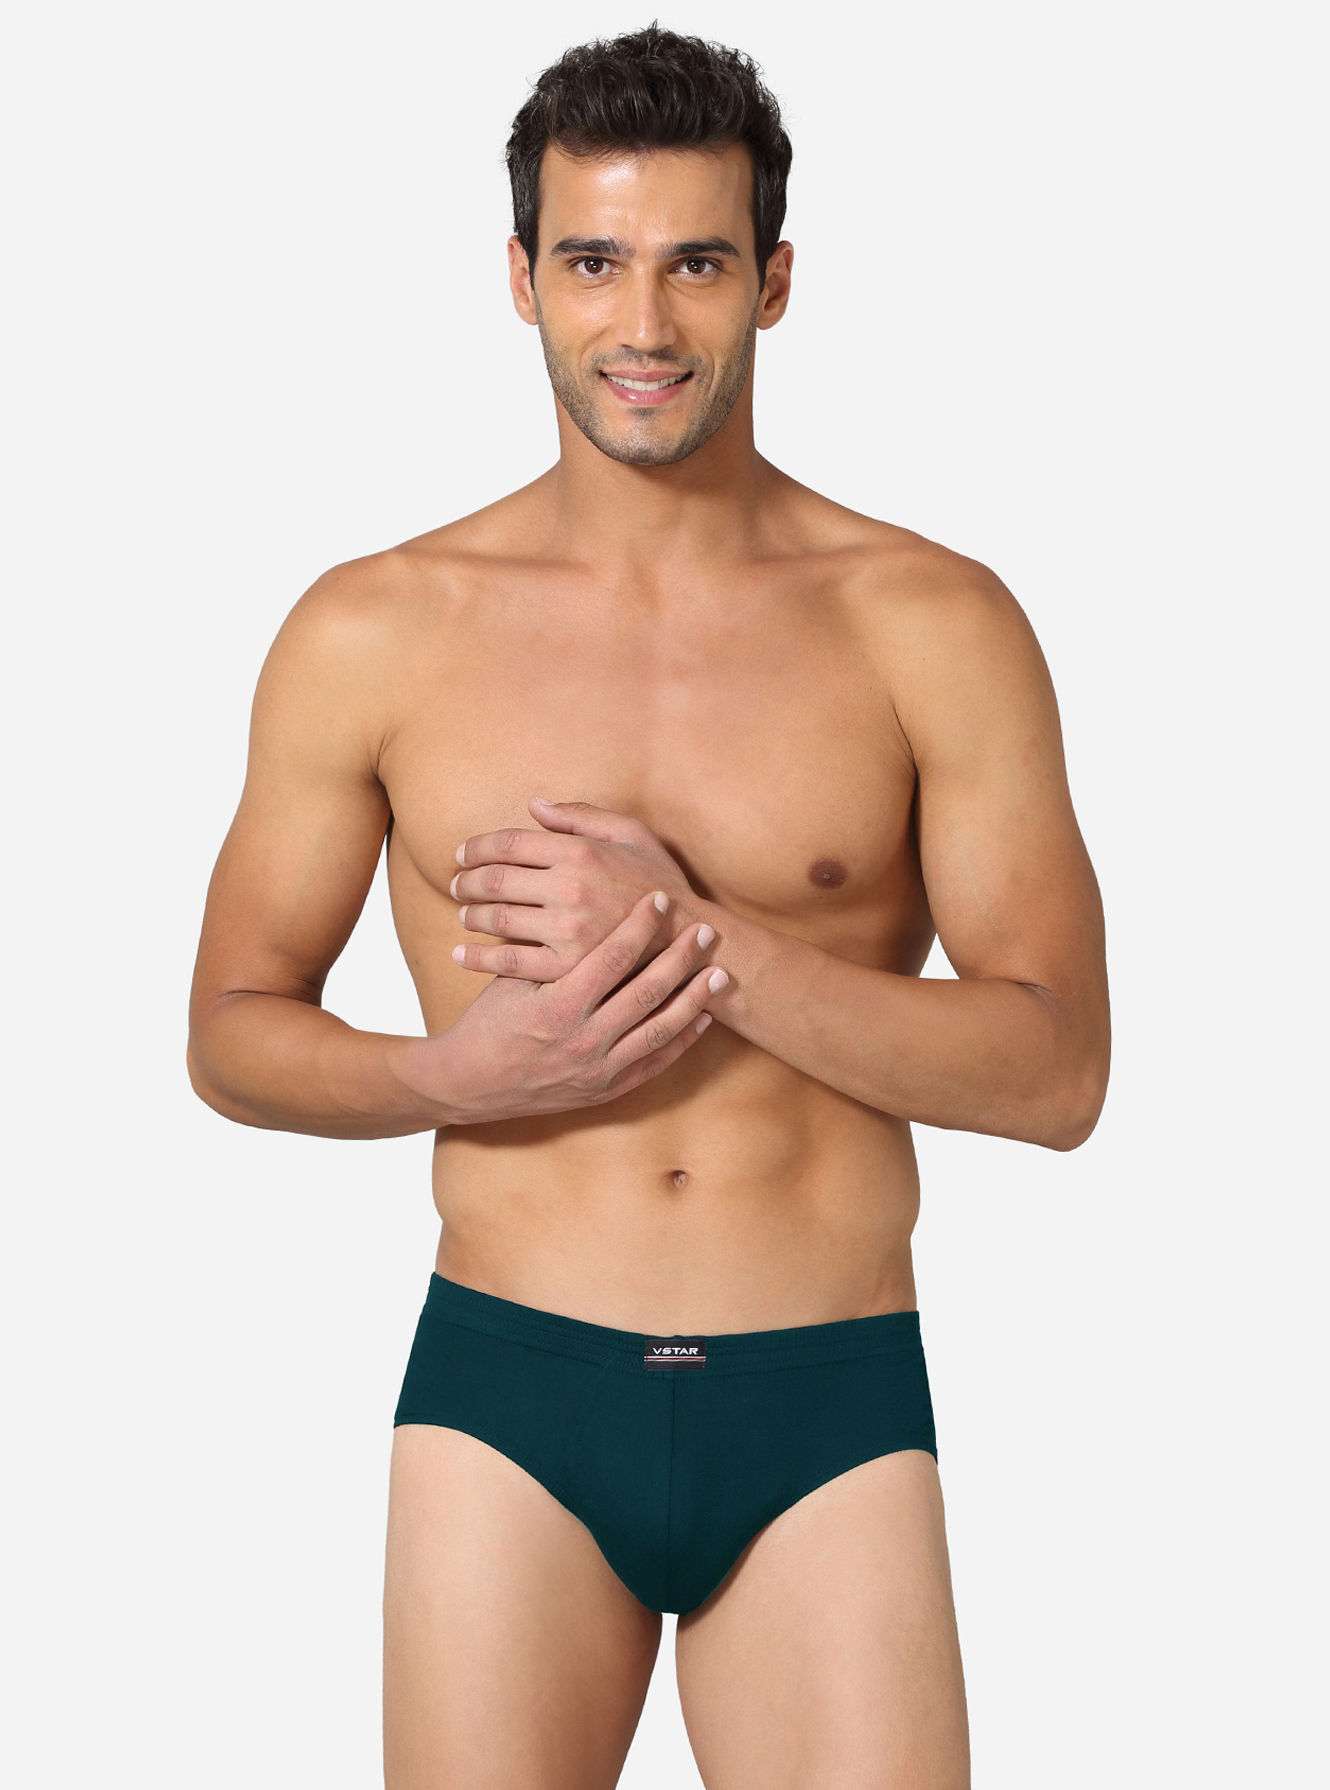 Premium combed cotton brief with square cut styling & concealed